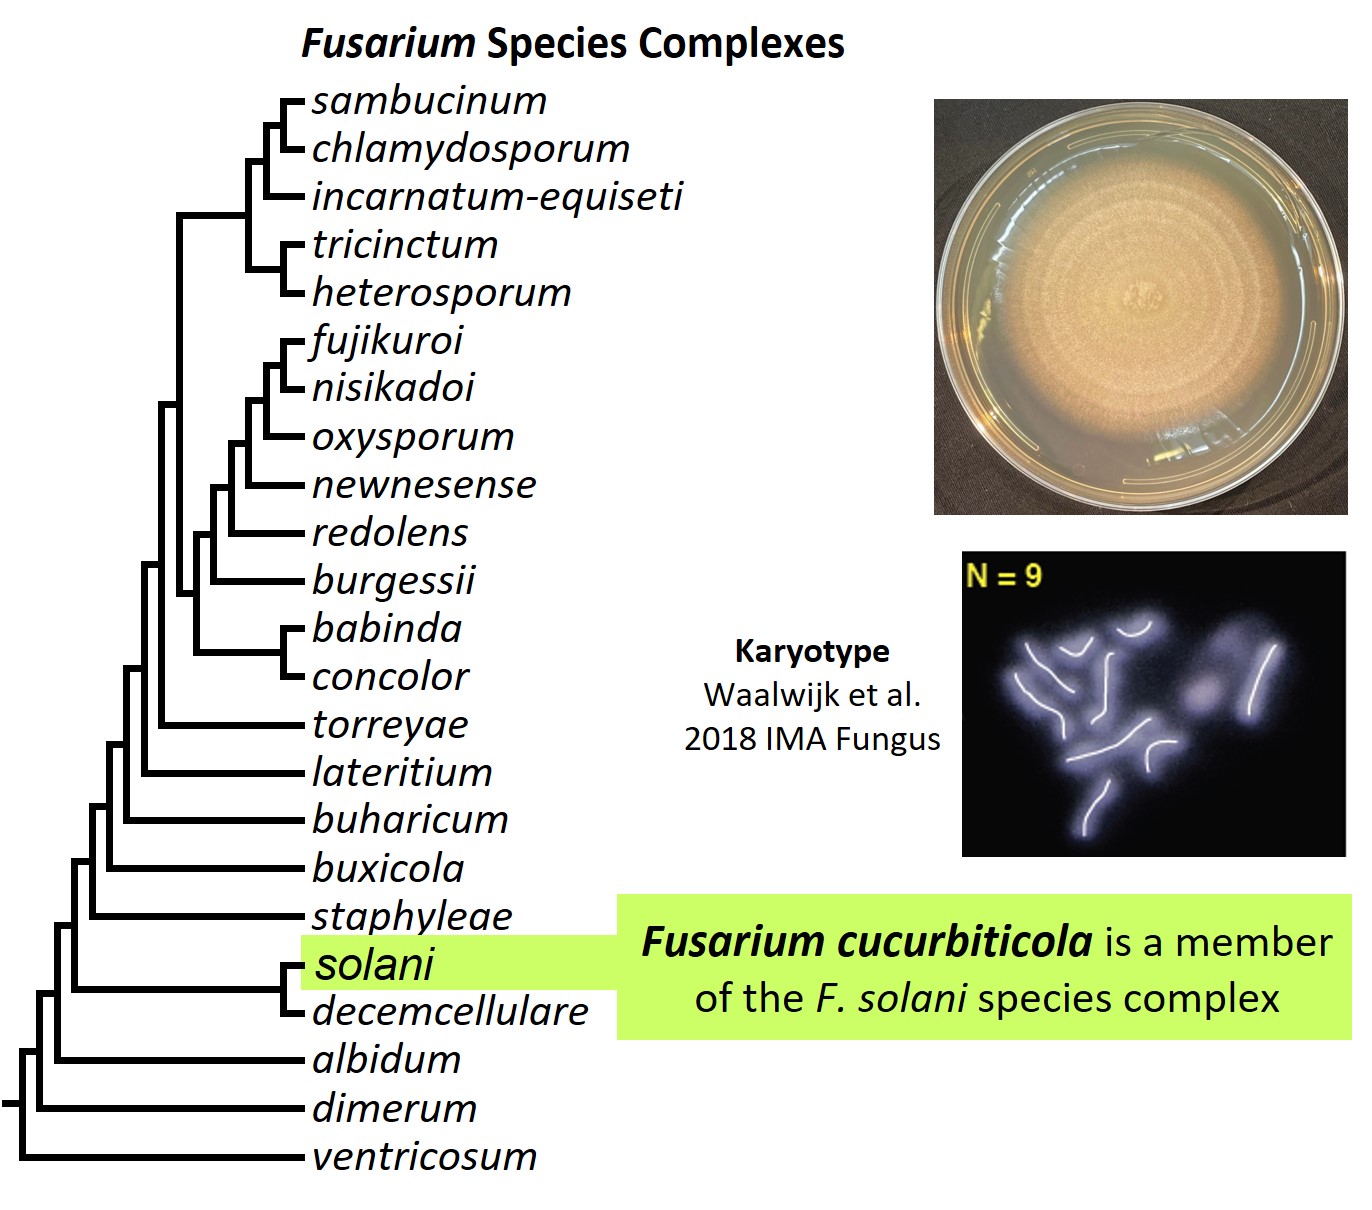 Left &ndash; tree showing phylogenetic relationships of the 23
Fusarium species complexes and placement of F. cucurbiticola within
the F. solani species complex. In the tree, species complex names
are abbreviated using specific epithets of the species after which
the complexes are named (e.g., the F. sambucinum species complex is
abbreviated as sambucinum). Upper right &ndash; culture of F.
cucurbiticola NRRL 22153 growing on potato dextrose agar medium.
Lower right &ndash; karyotype of F. cucurbiticola NRRL 22153. Image
credit: Robert H. Proctor, Amy McGovern and Crystal Probyn.